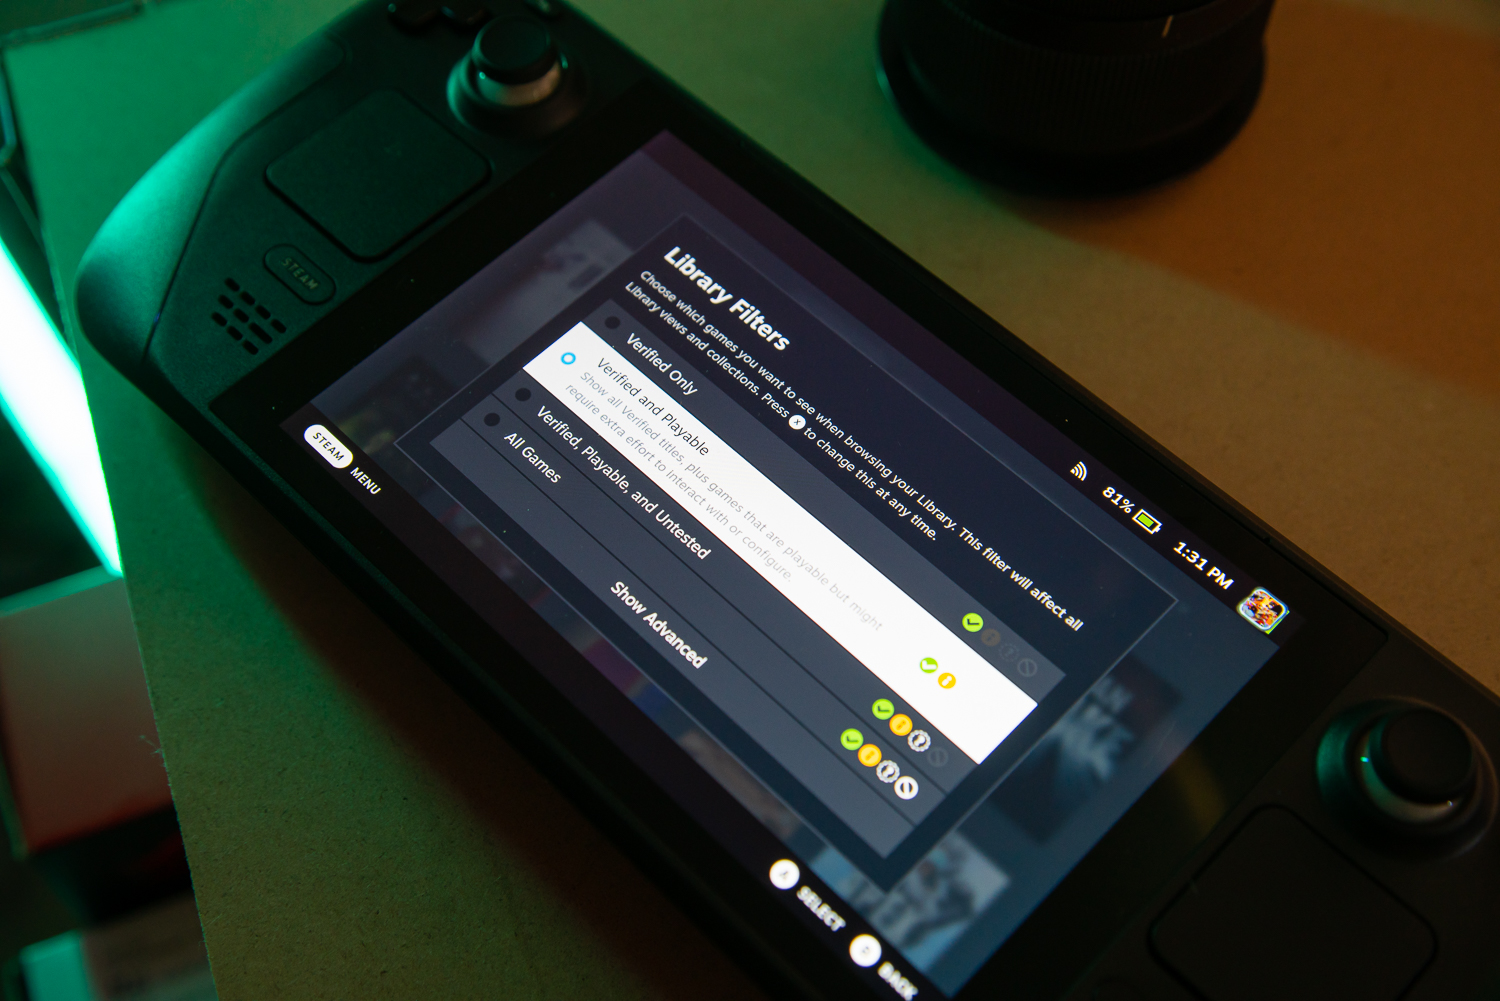 now lets you play games on the platform through 'Playables